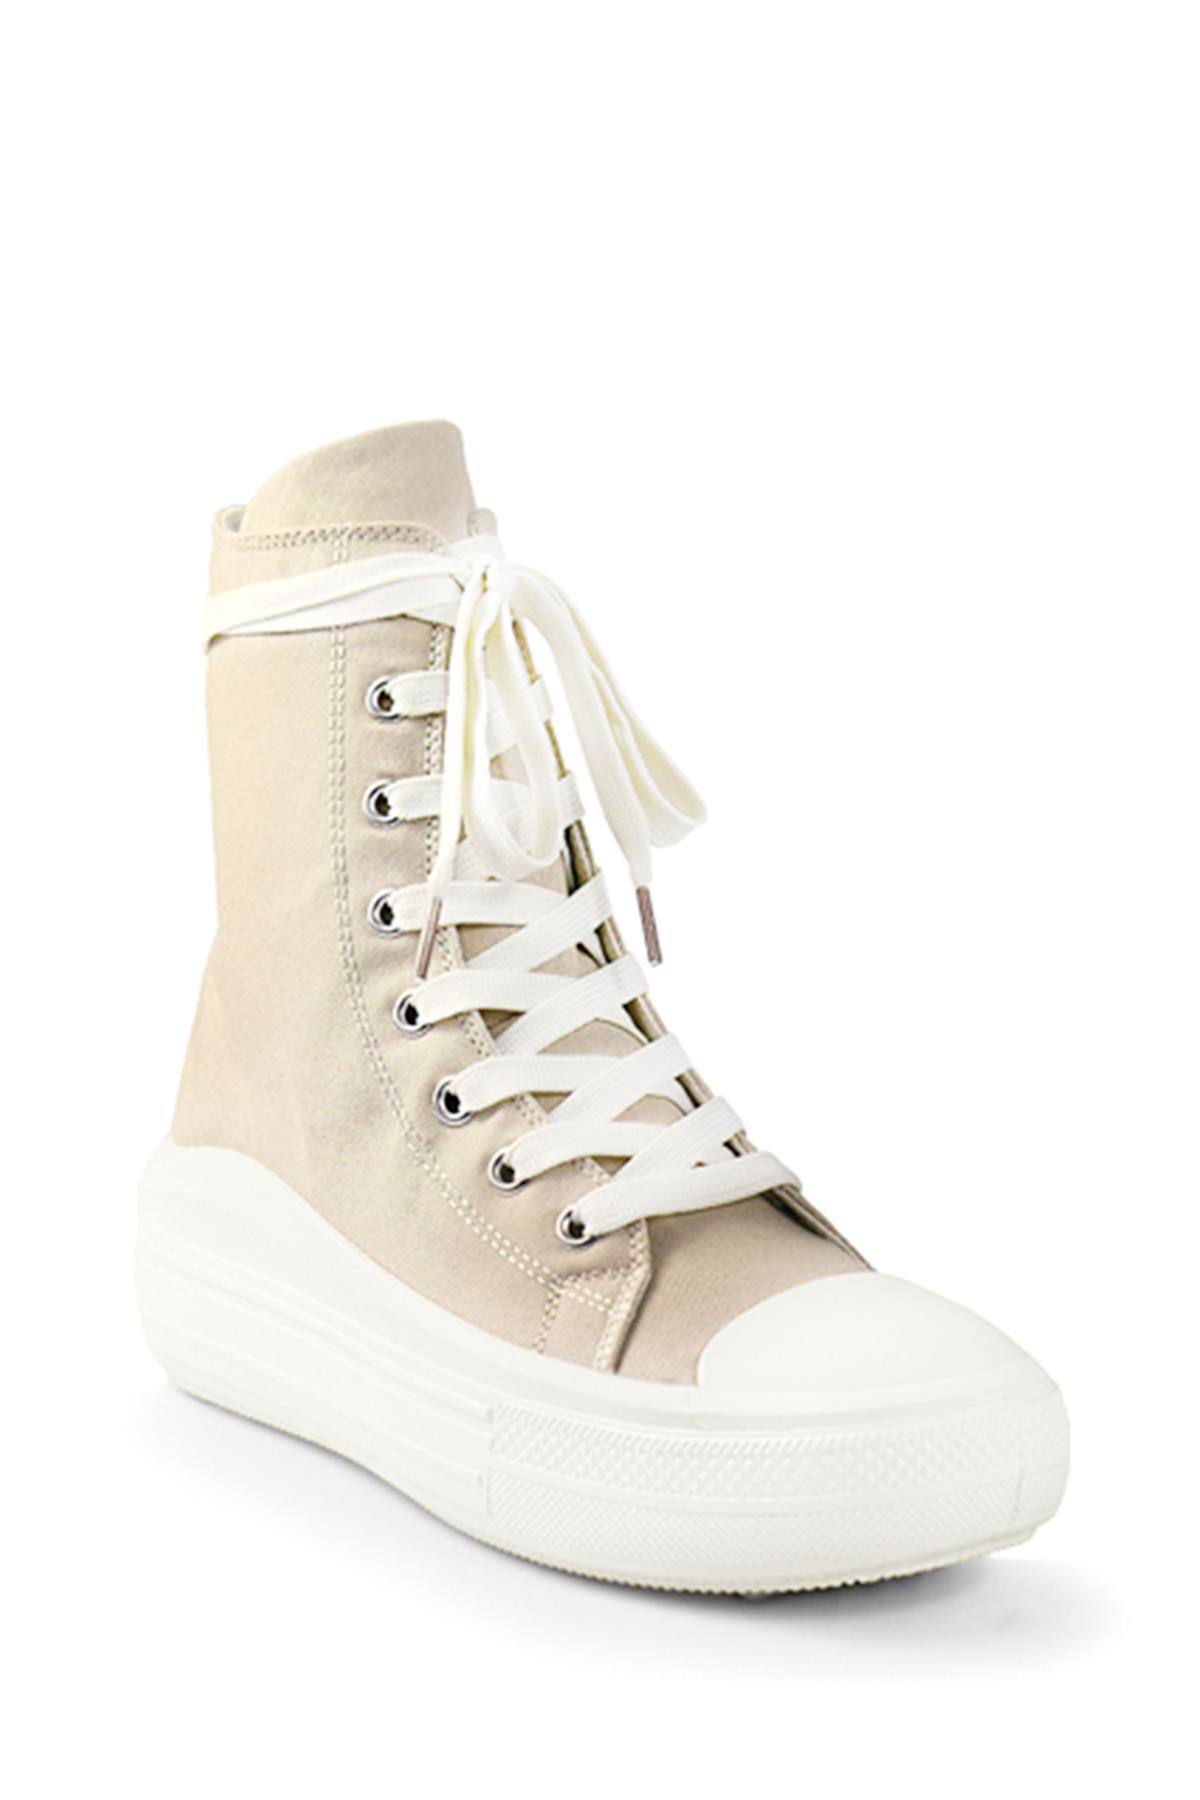 HIGH TOP LACE UP SNEAKERS 12 PAIRS